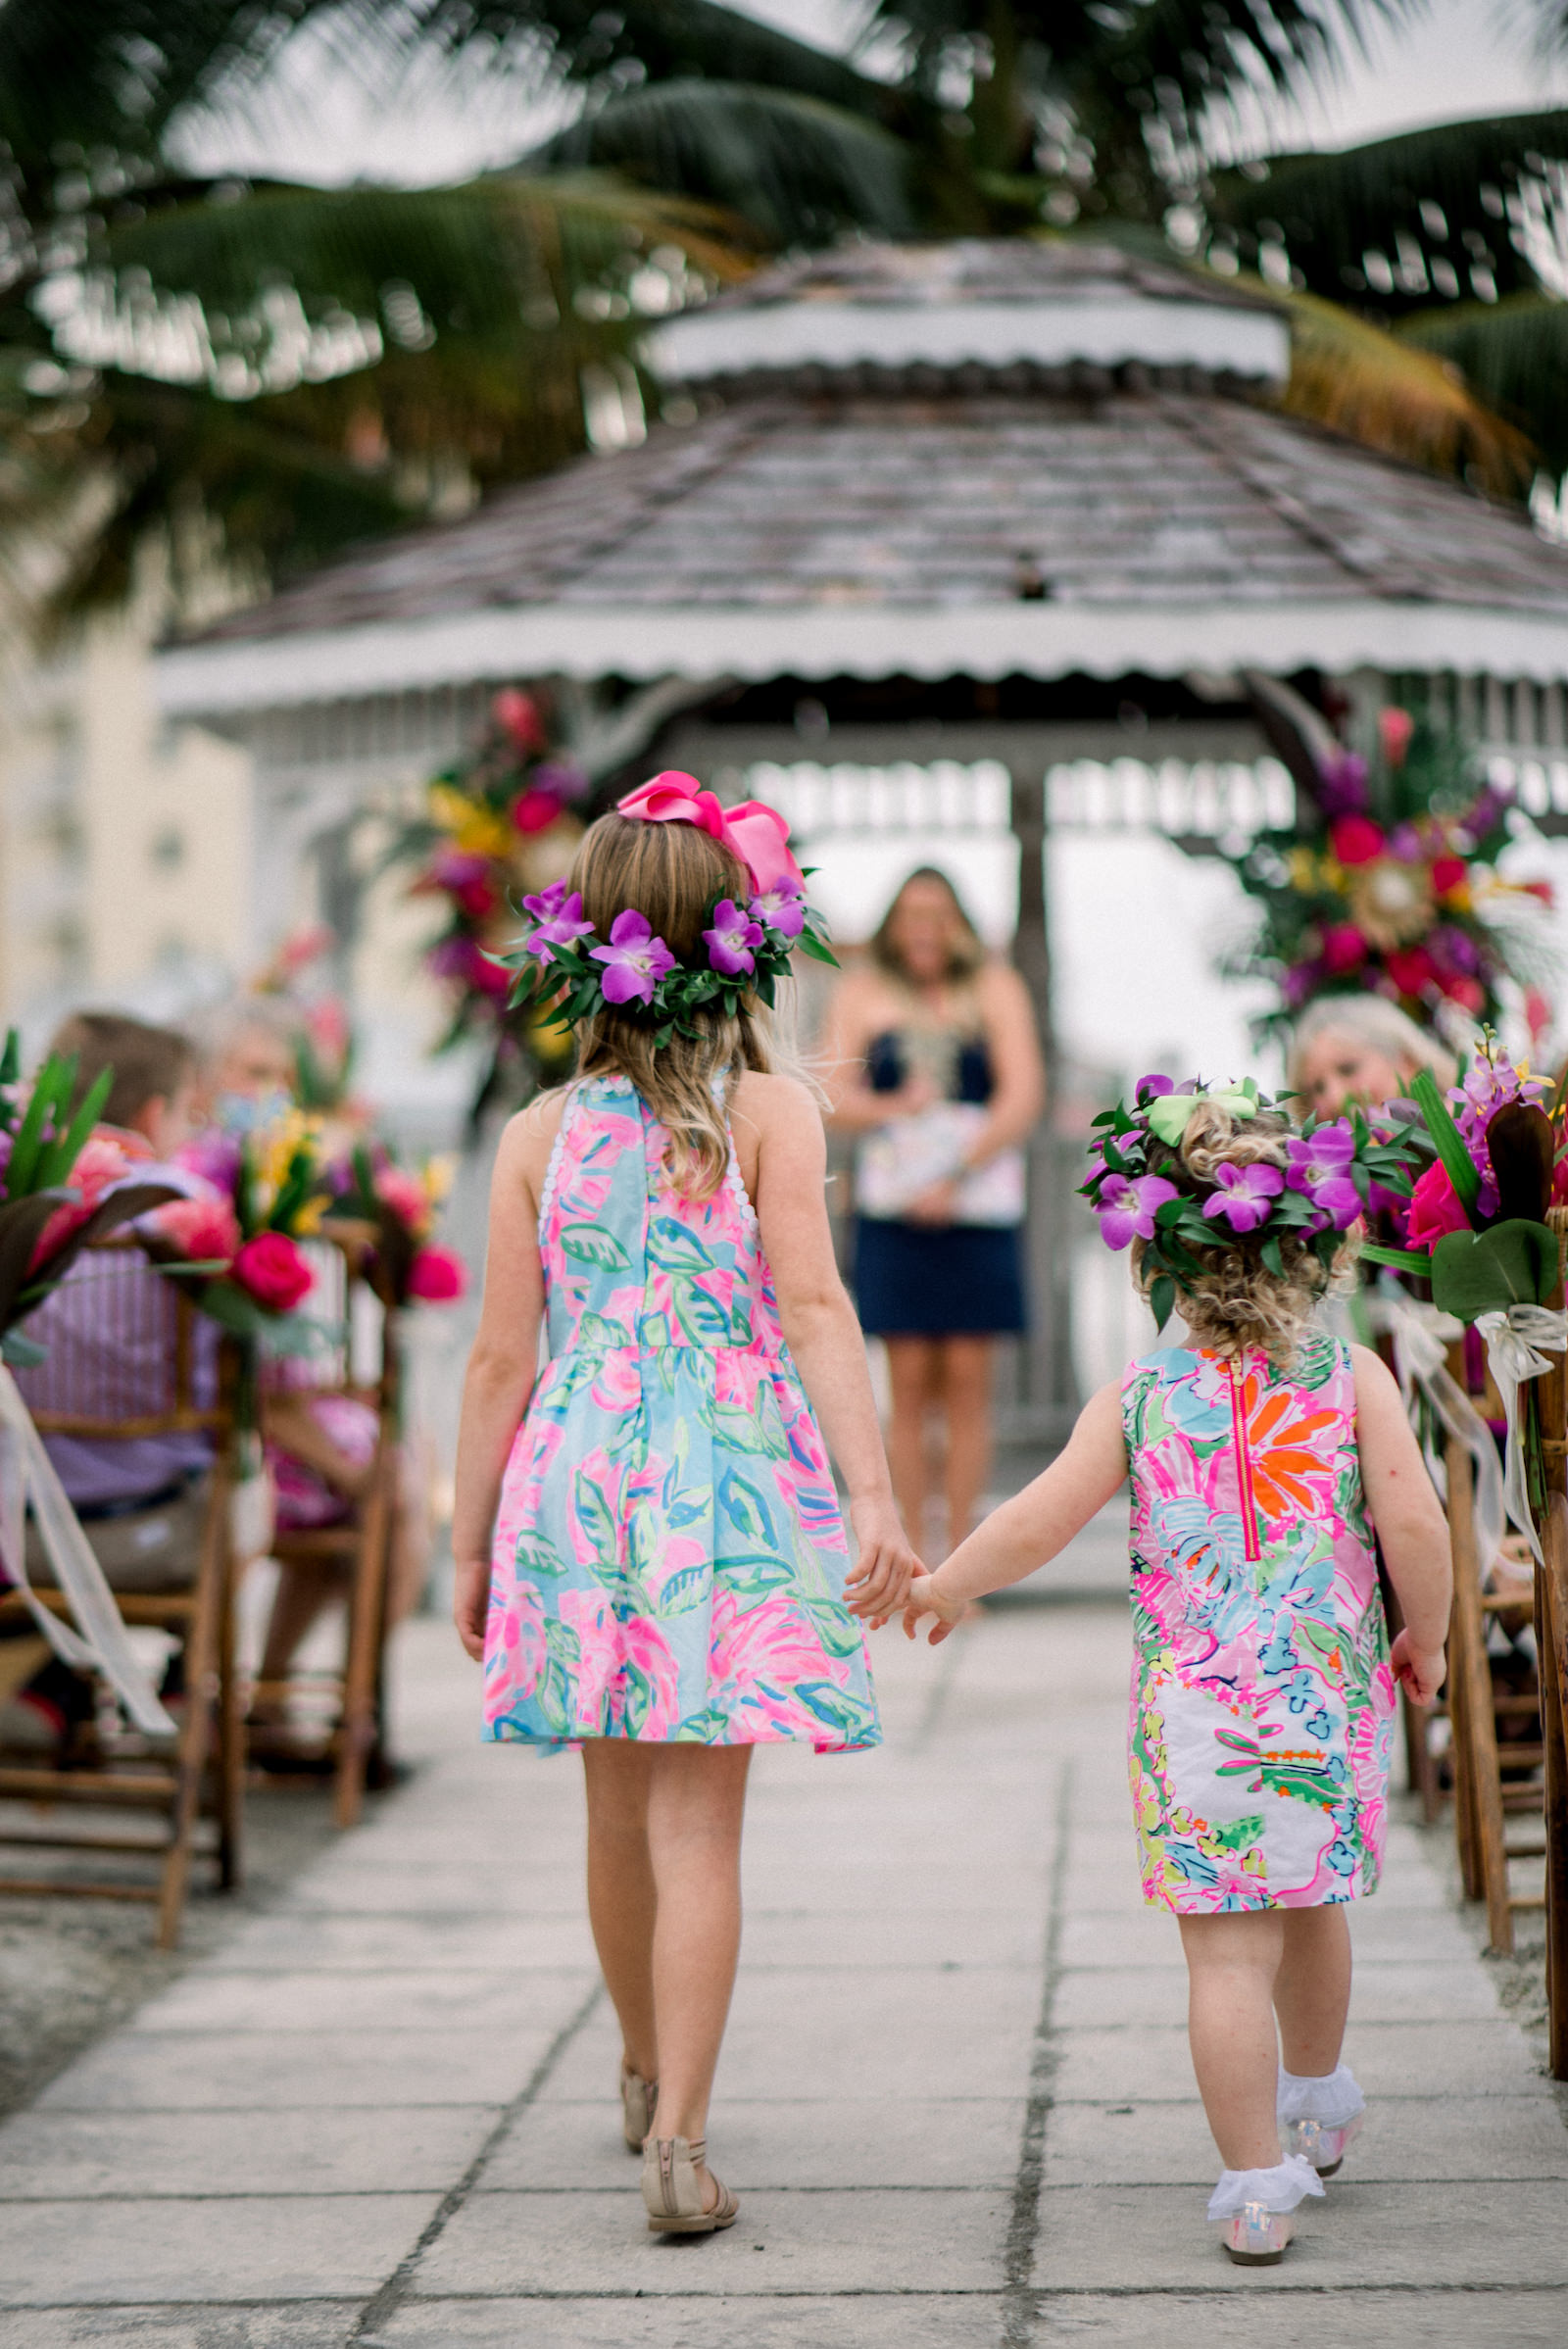 Tropical Florida Wedding Ceremony With Lilly Pulitzer Themed Flower Girl Wearing Purple Hibiscus Flower Crowns | Tampa Bay Vow Renewal and Micro wedding Planner Perfecting The Plan | St. Petersburg Private Beachfront Venue Isla Del Sol | St. Pete Beach DJ Grant Hemond & Associates